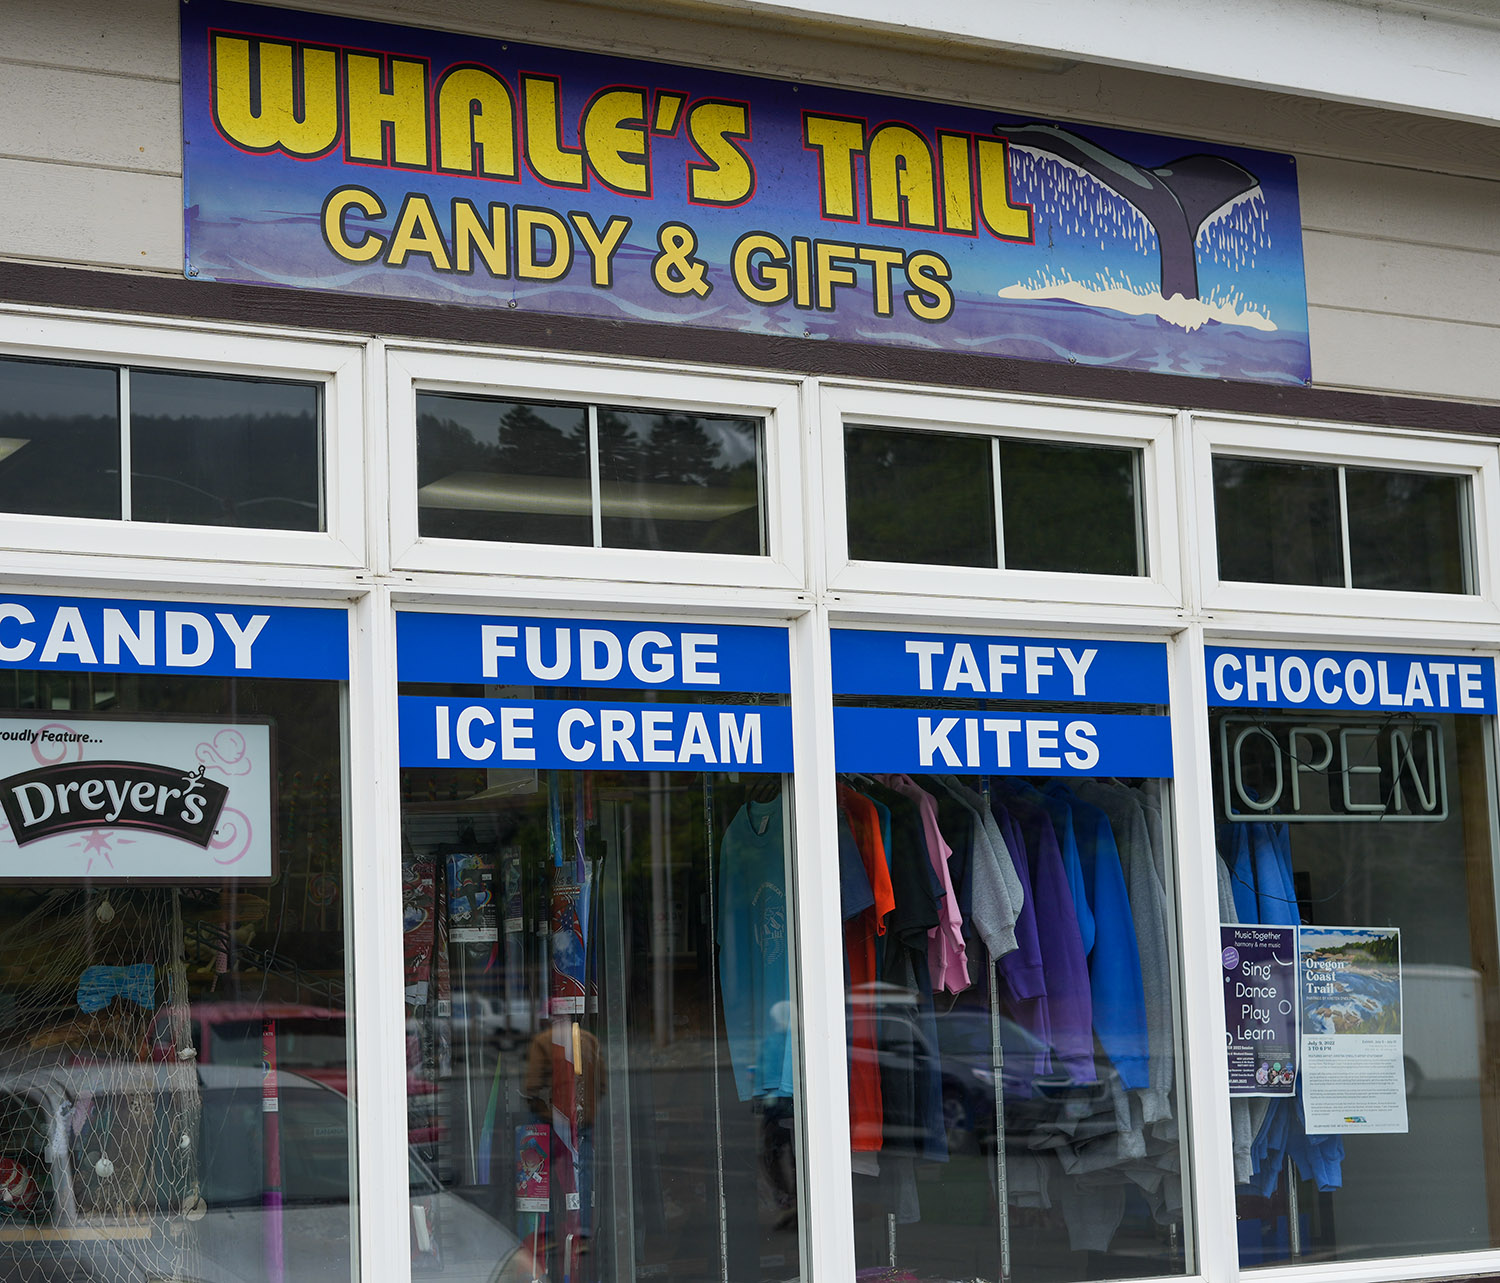 whales-tail-candy-and-gifts.jpg